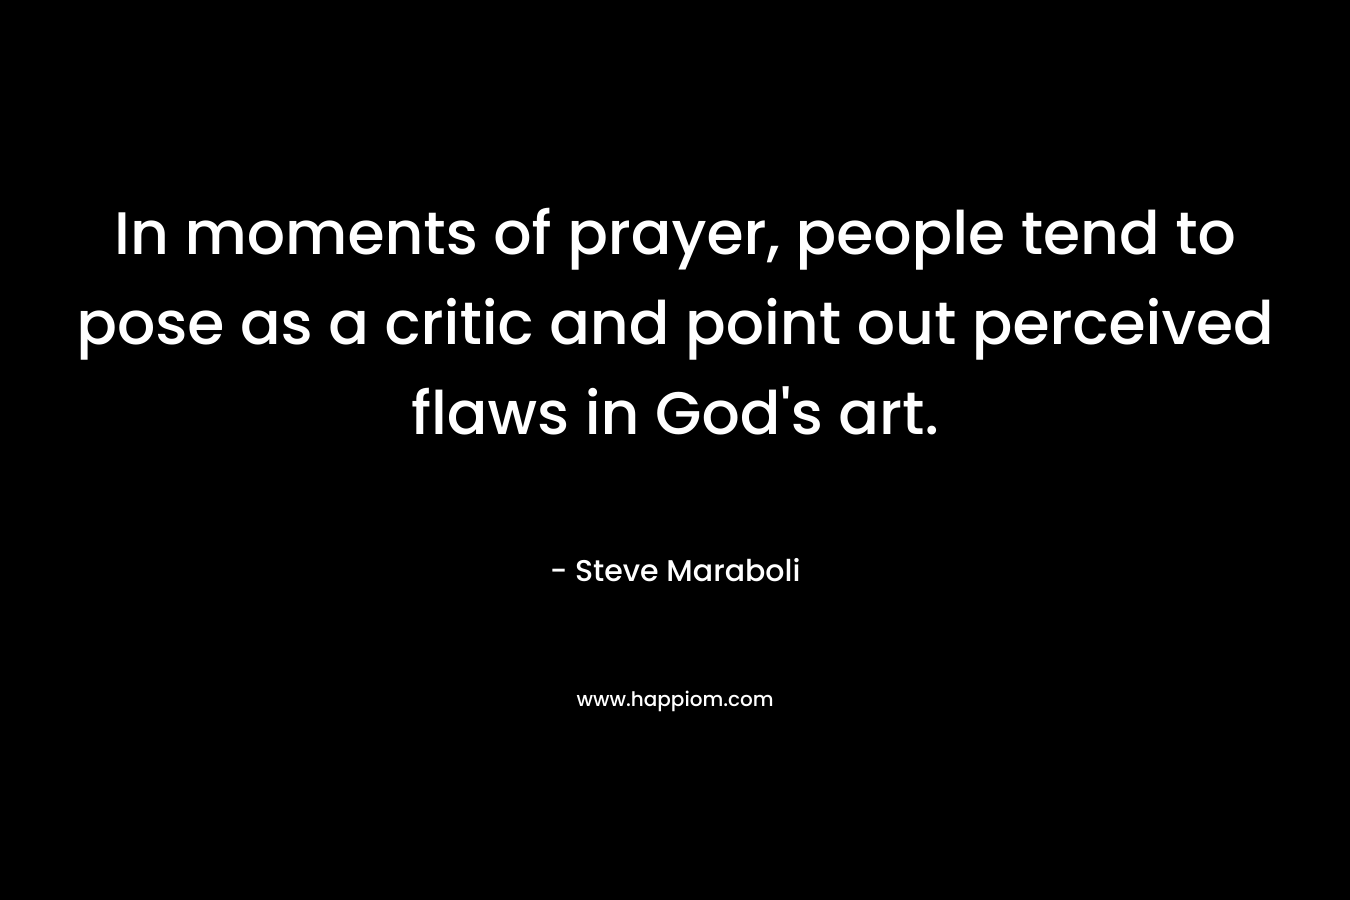 In moments of prayer, people tend to pose as a critic and point out perceived flaws in God's art.